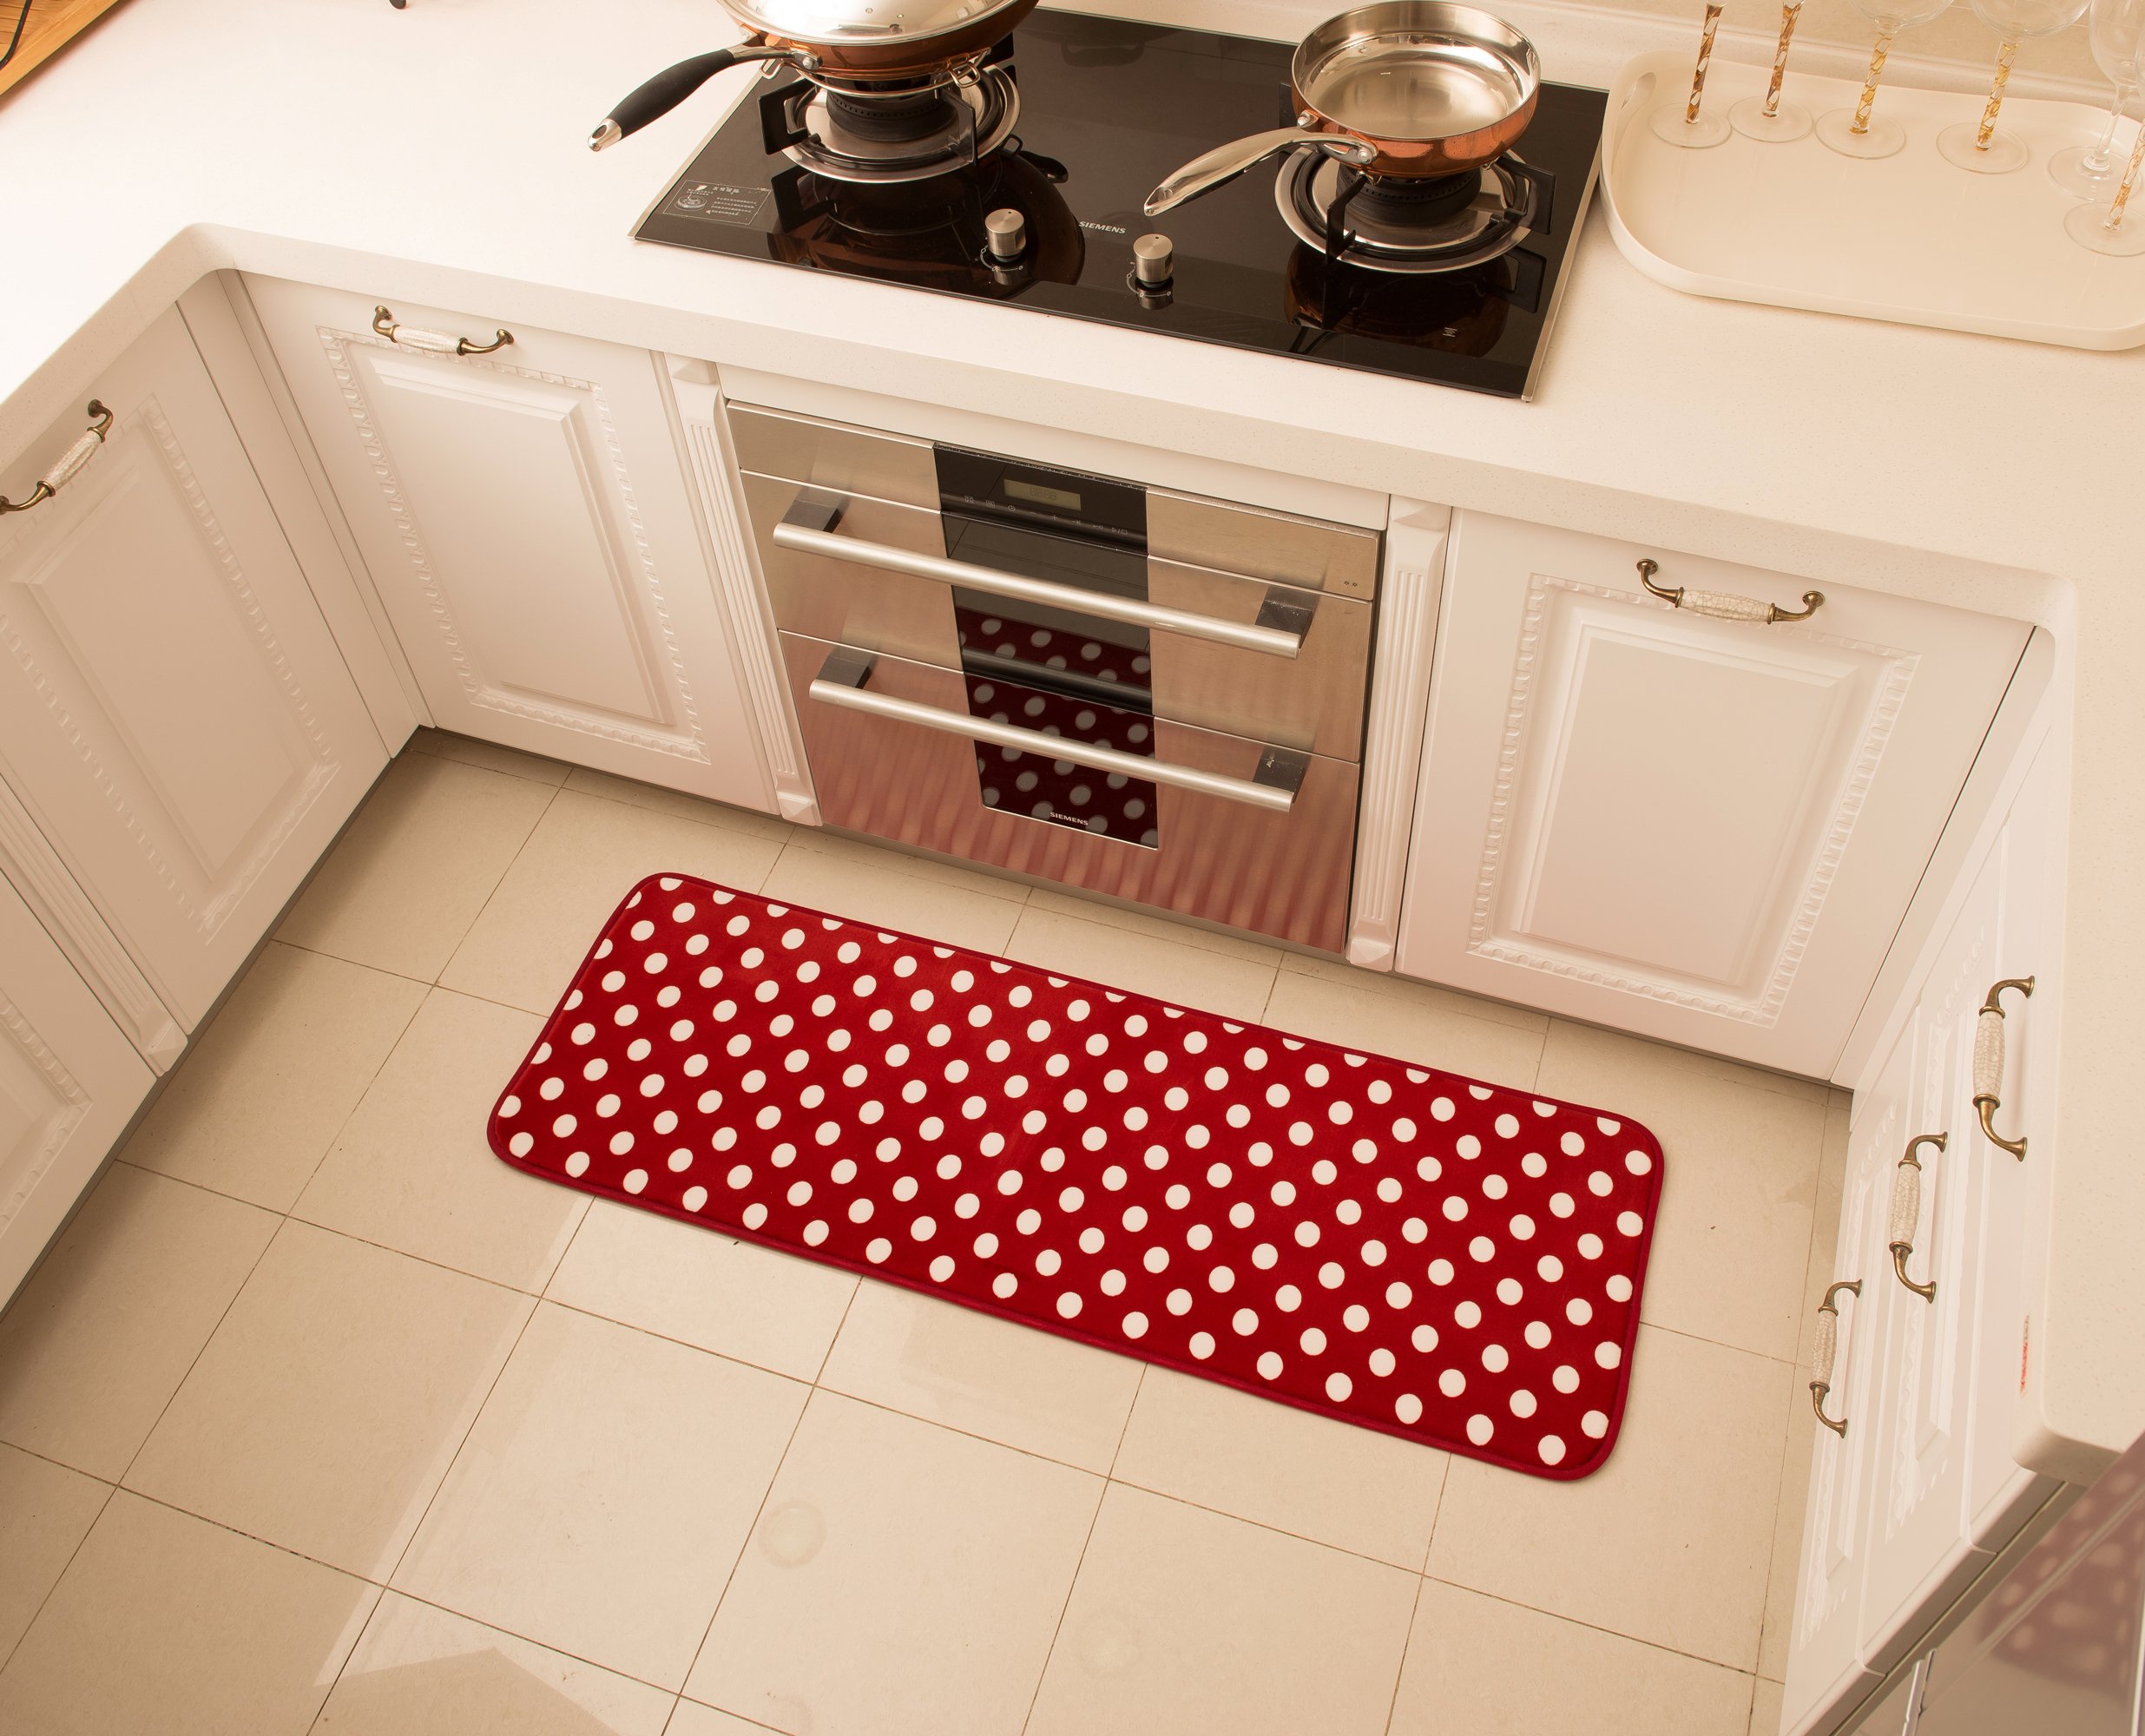 Aboo Kitchen Rugs 2 Pieces Memory Foam Kitchen Mat Non-Slip Red With White Dot (15.7"×23.6" + 15.7"×47.2" Red)